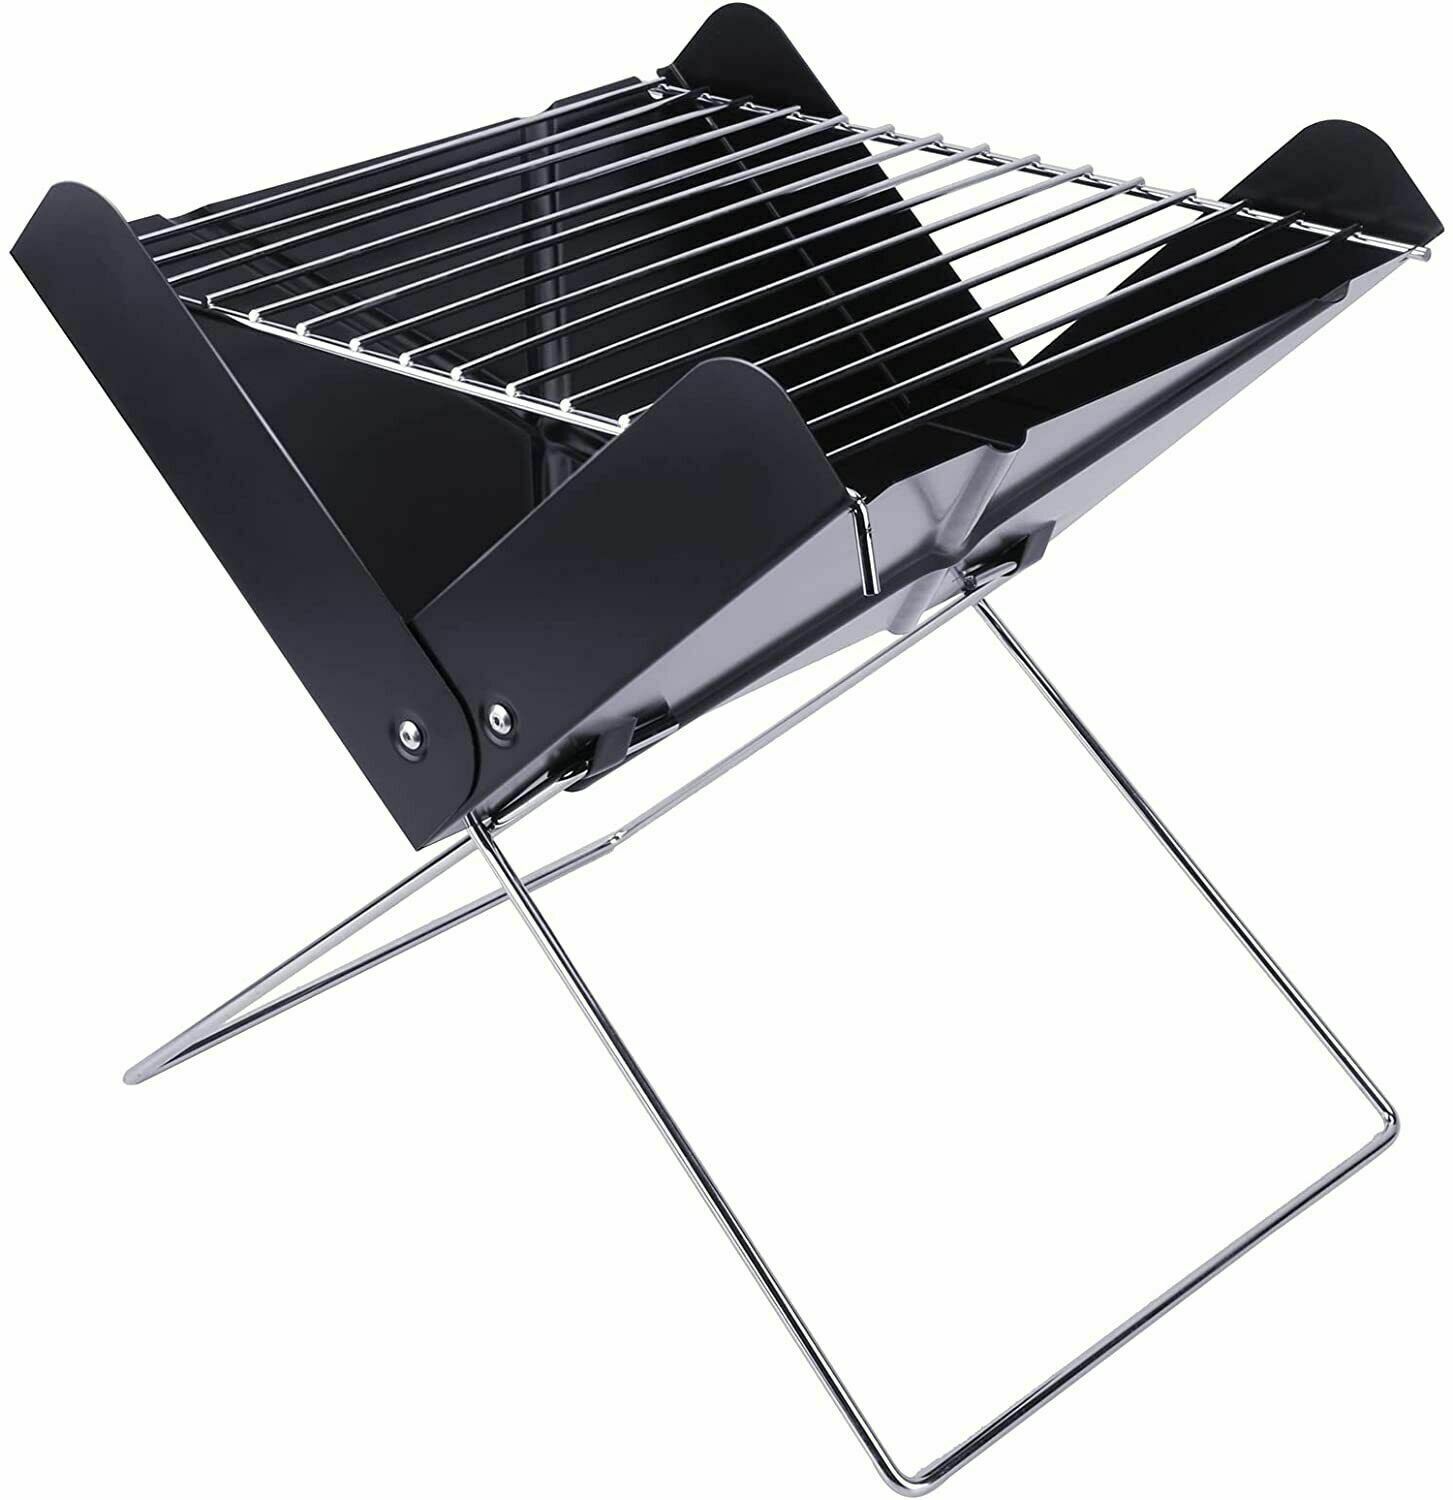 YSSOA 12&rdquo; Portable Grill Charcoal Barbecue Grill - Folding Grill Notebook Shape Charcoal Grill, Detachable Collapsible, Mini Tabletop Camping Grill BBQ, Black-CASAINC